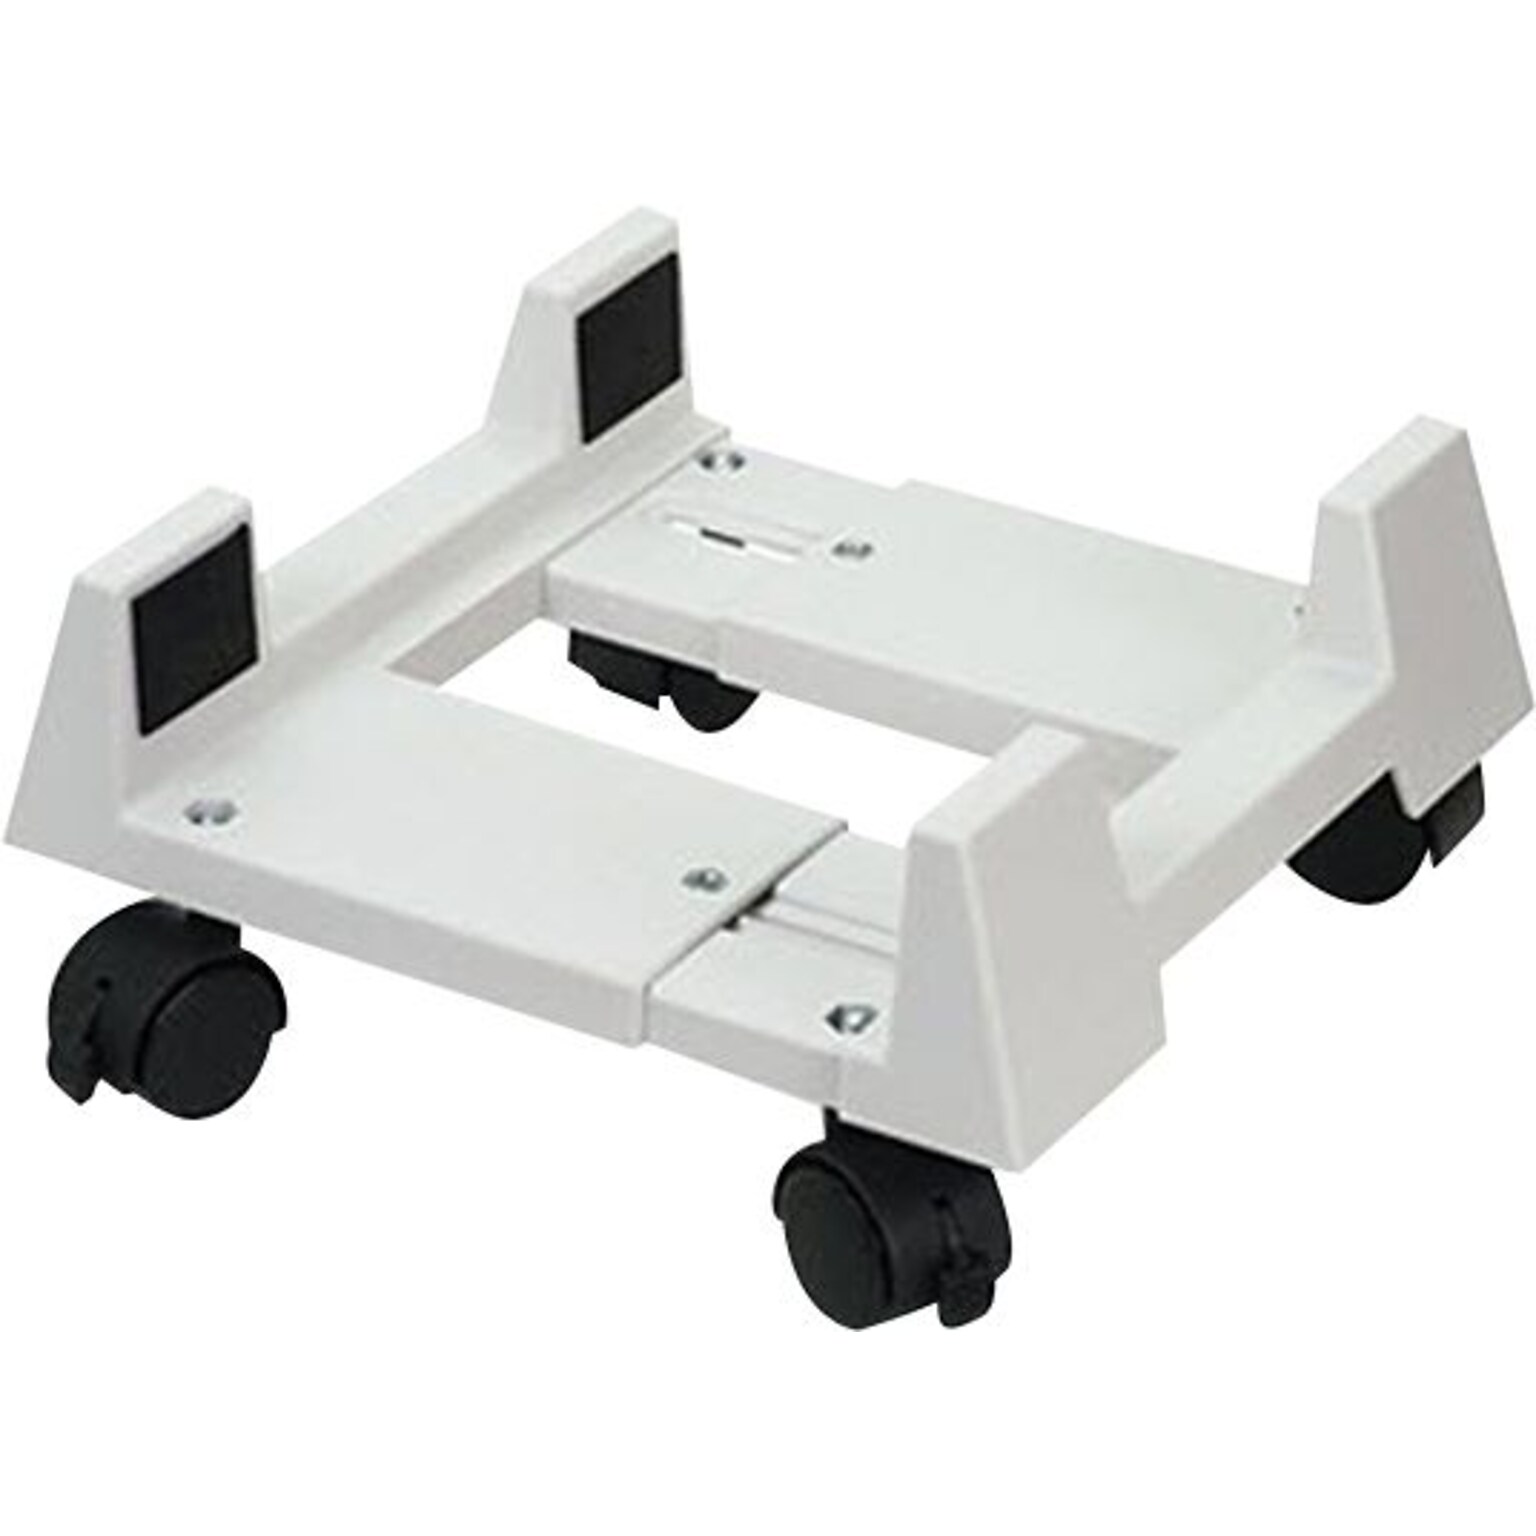 Innovera® 5H x 8 3/4W x 10D Mobile CPU Stand; Light Gray